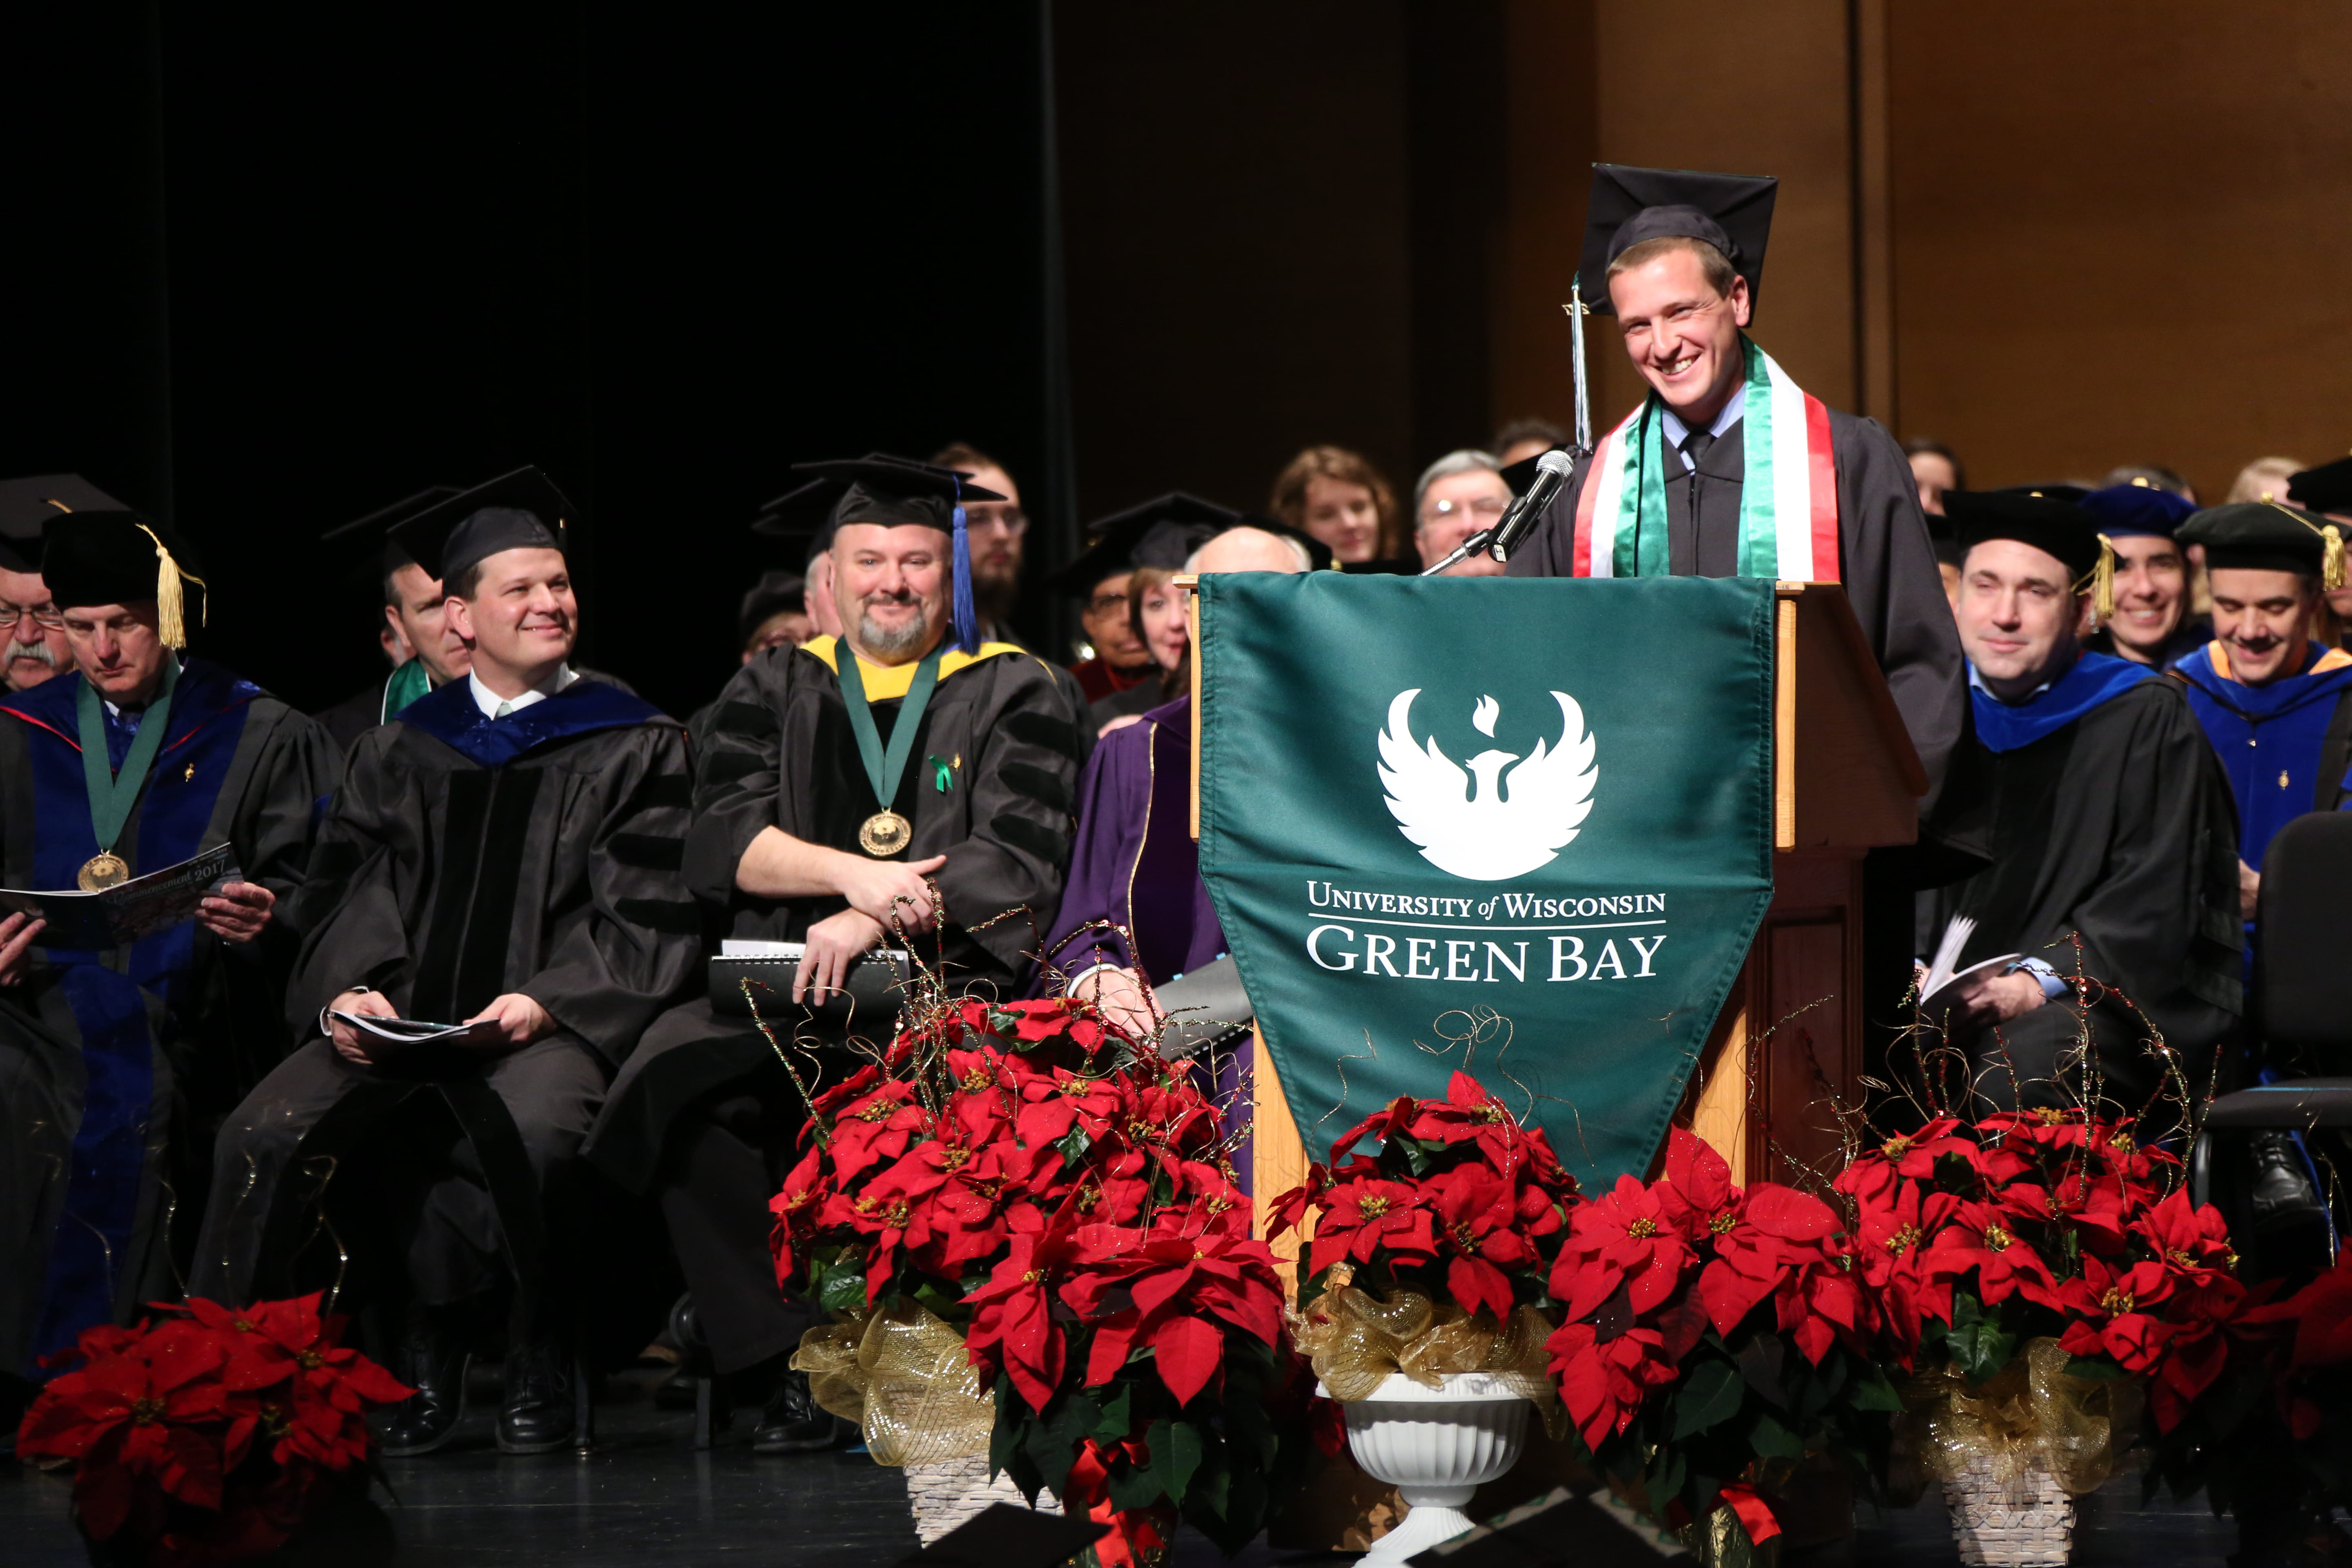 Riley Garbe's commencement address